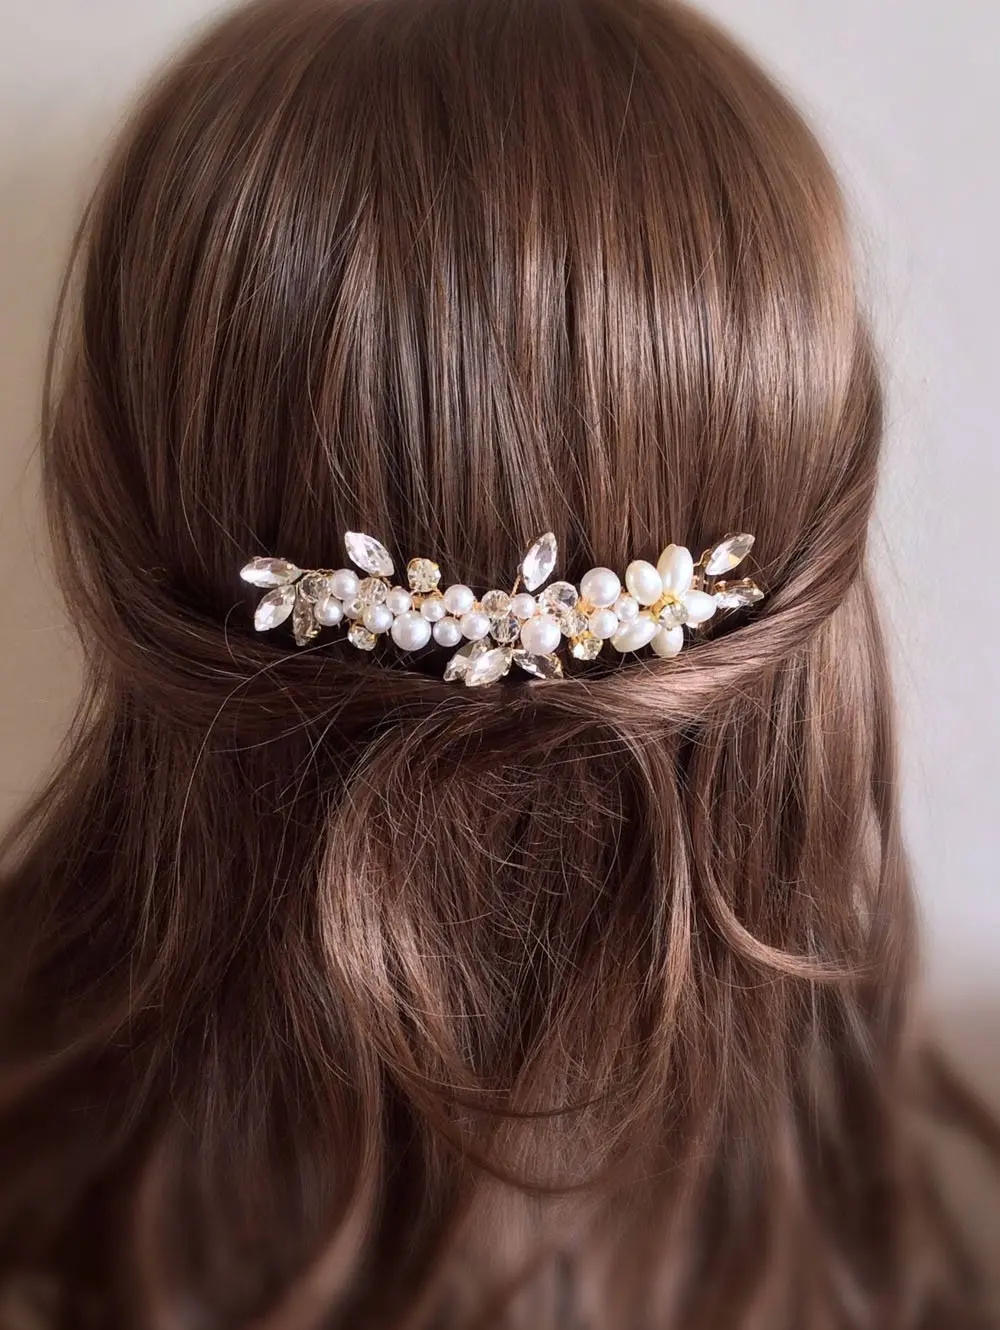 Cheap Vintage Hair Combs For Wedding Find Vintage Hair Combs For